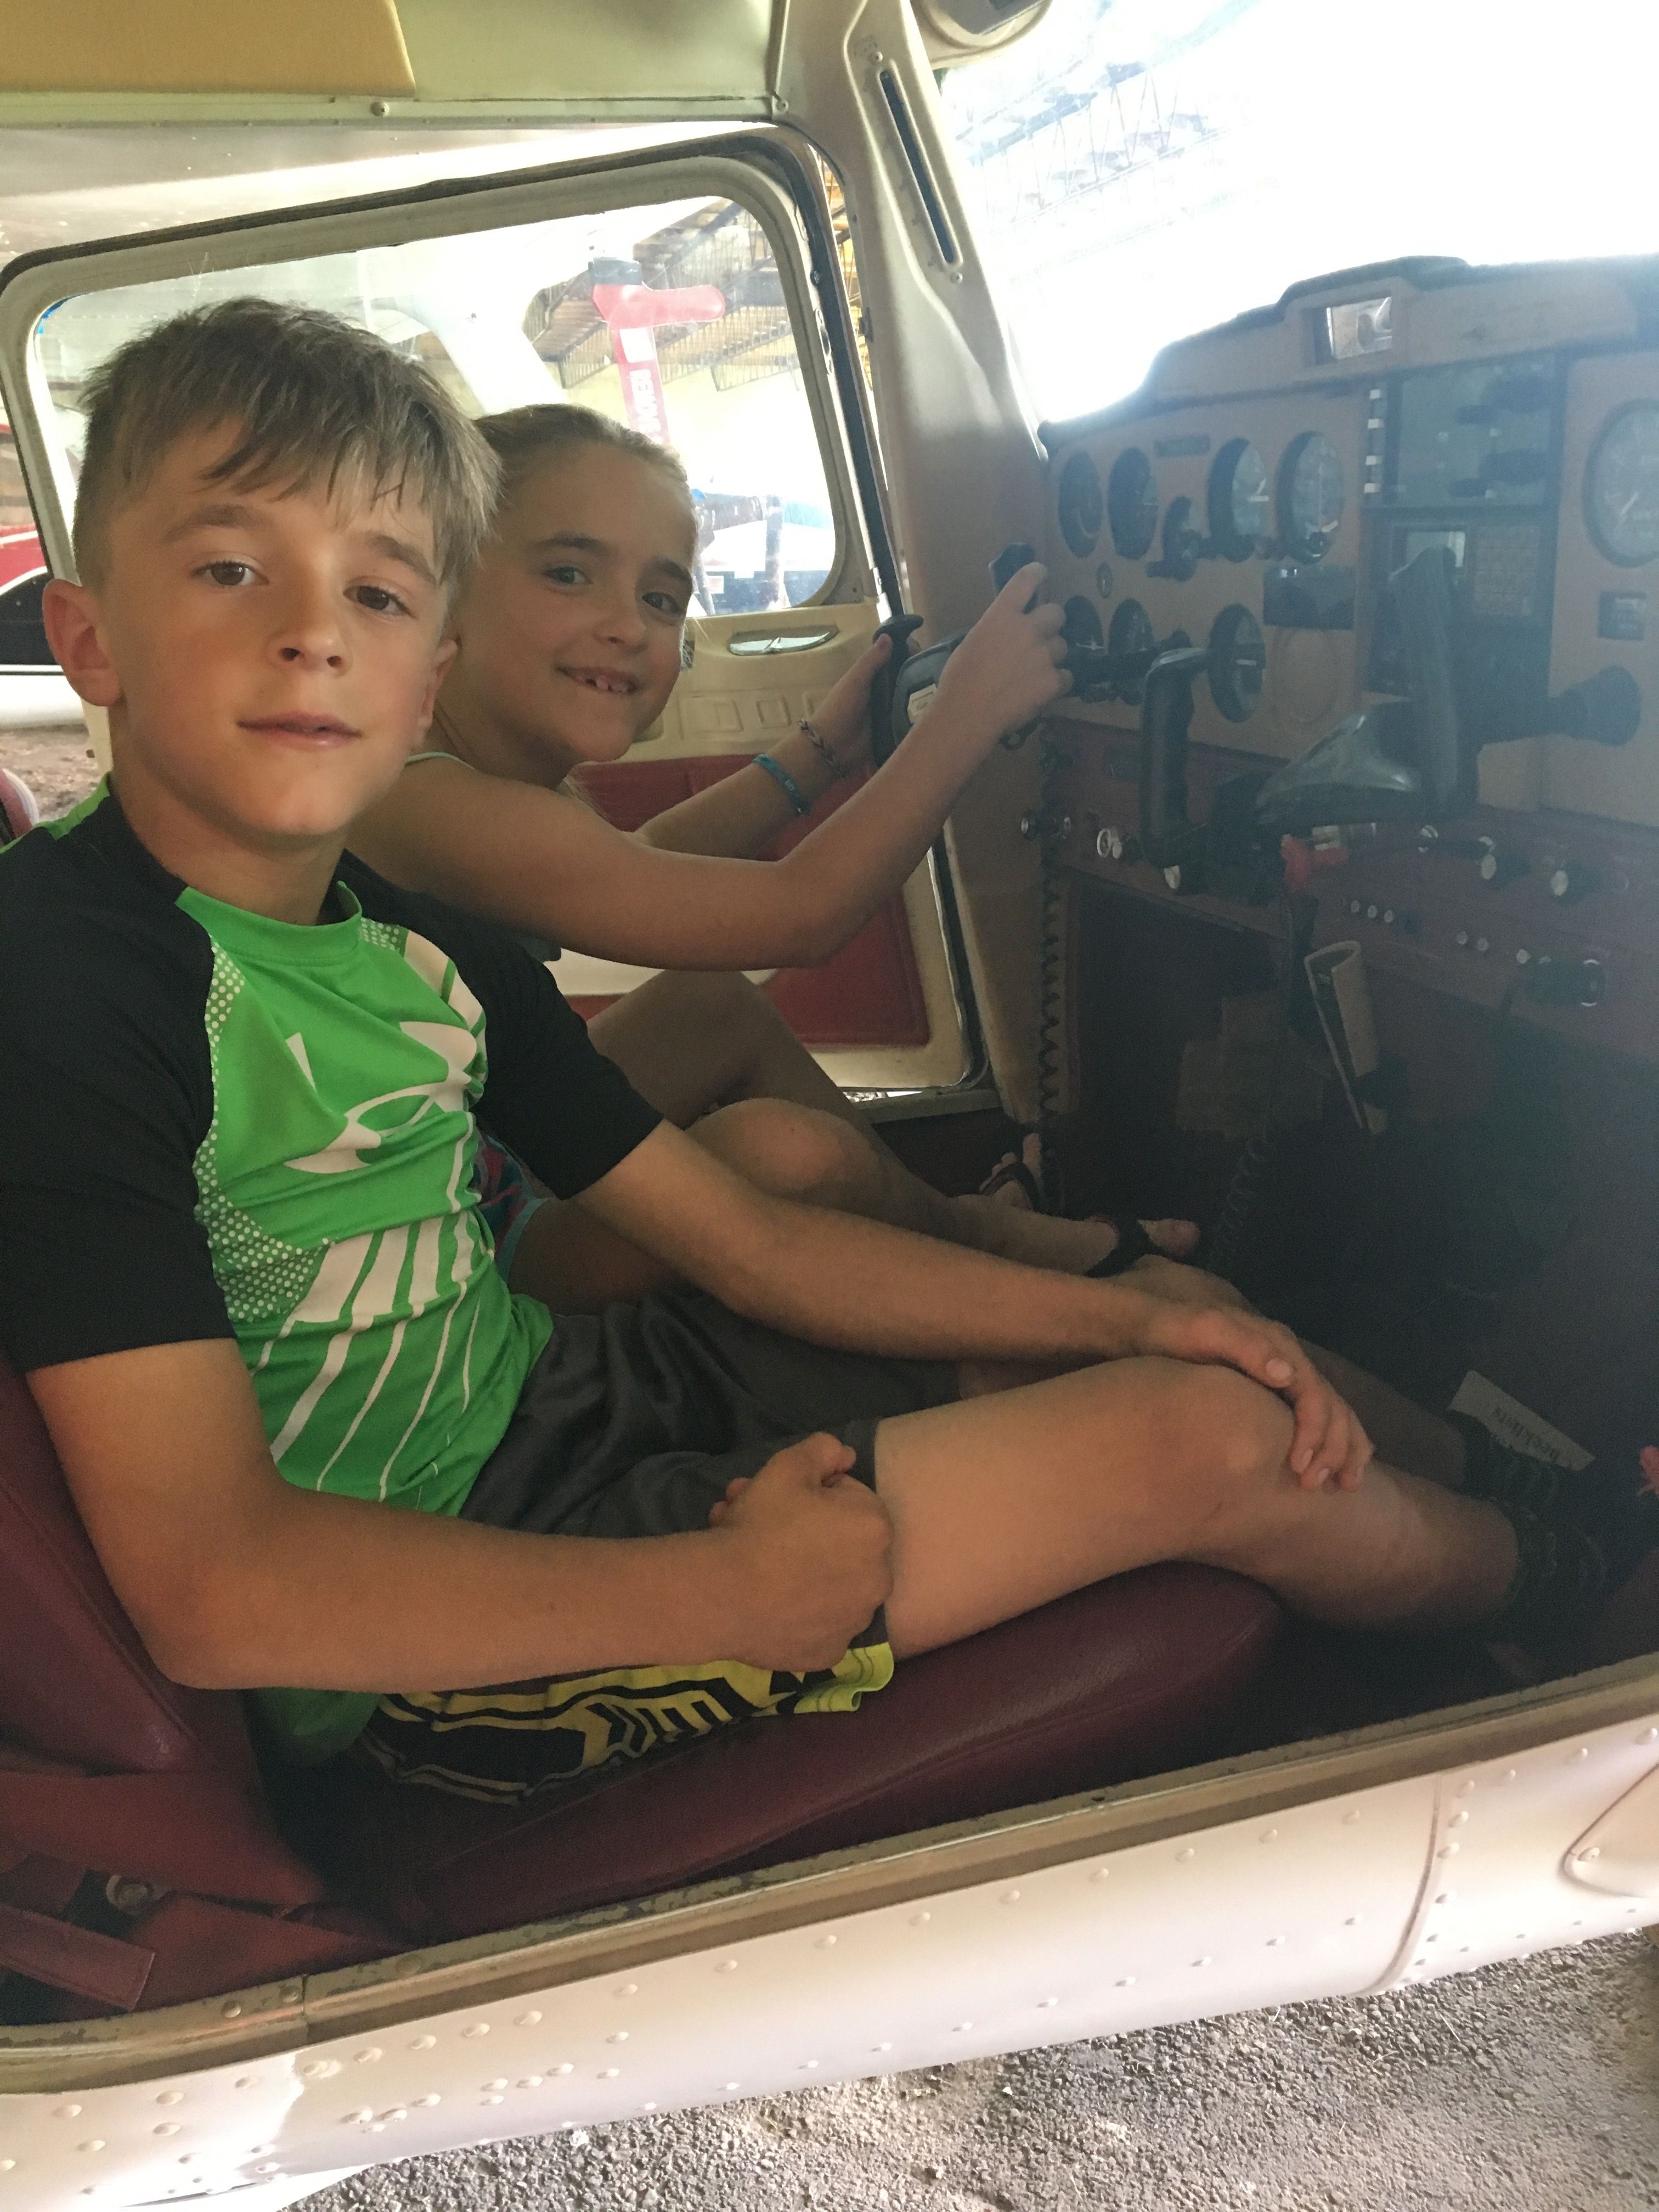 Your small donation to Flying.org will have a big impact- on kids and general aviation!